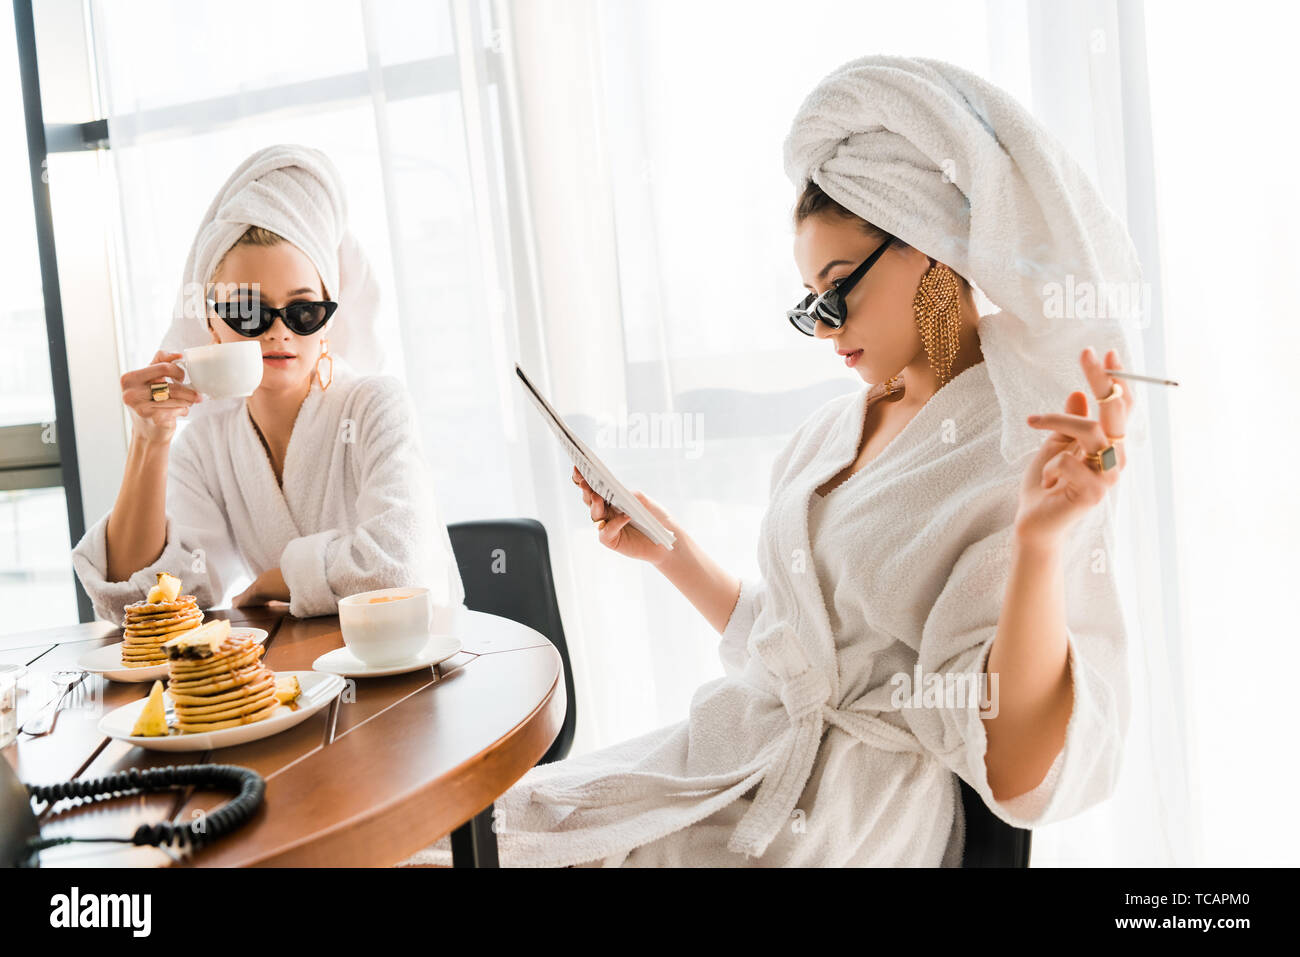 stylish women in bathrobes, sunglasses and jewelry with towels on heads smoking cigarette and reading newspaper at morning Stock Photo